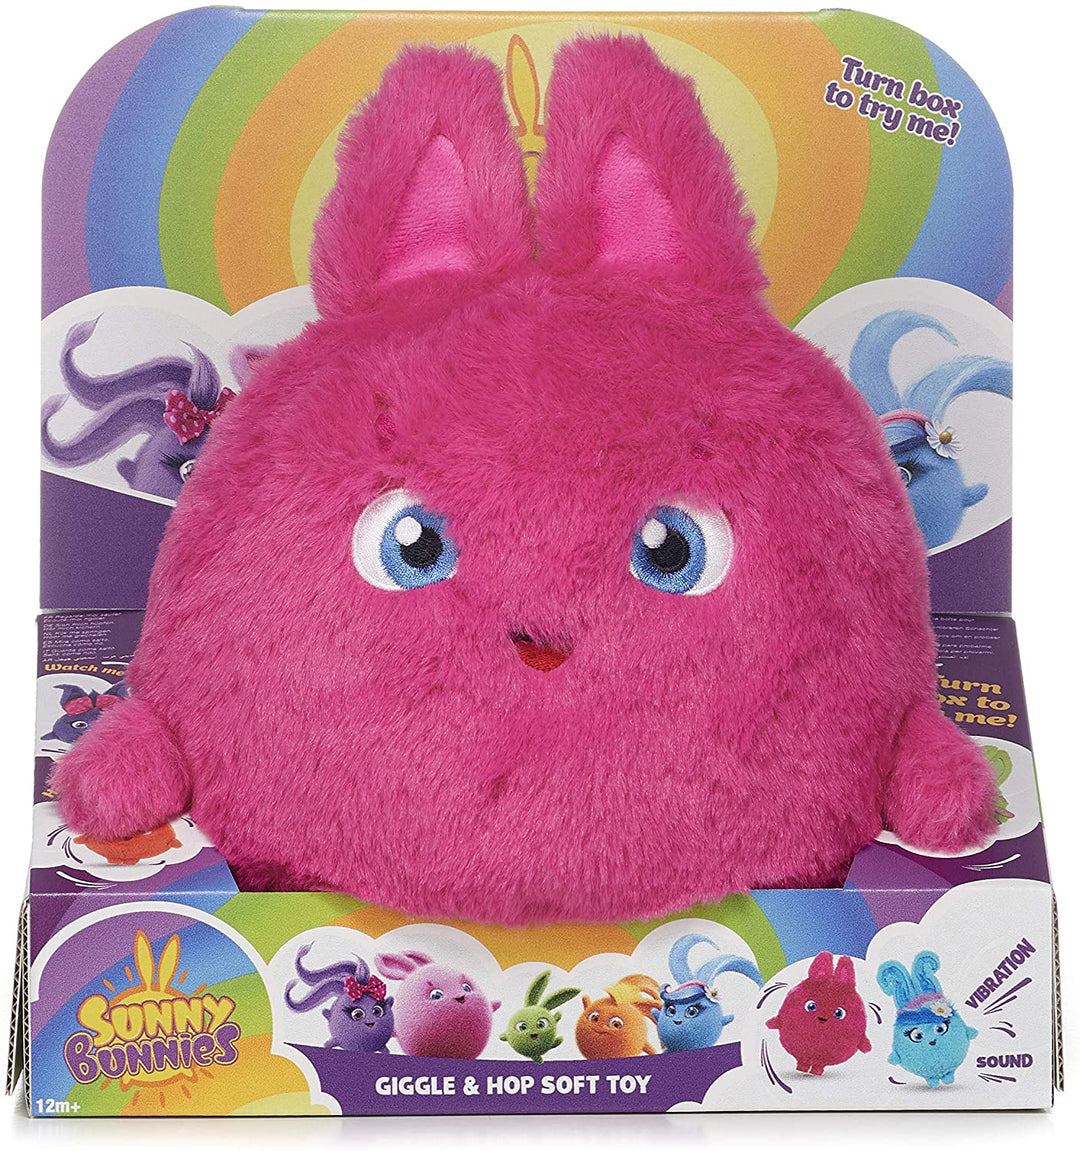 Posh Paws 37430 Sunny Bunnies Large Feature Big Boo Giggle &amp; Hop Peluche-25cm